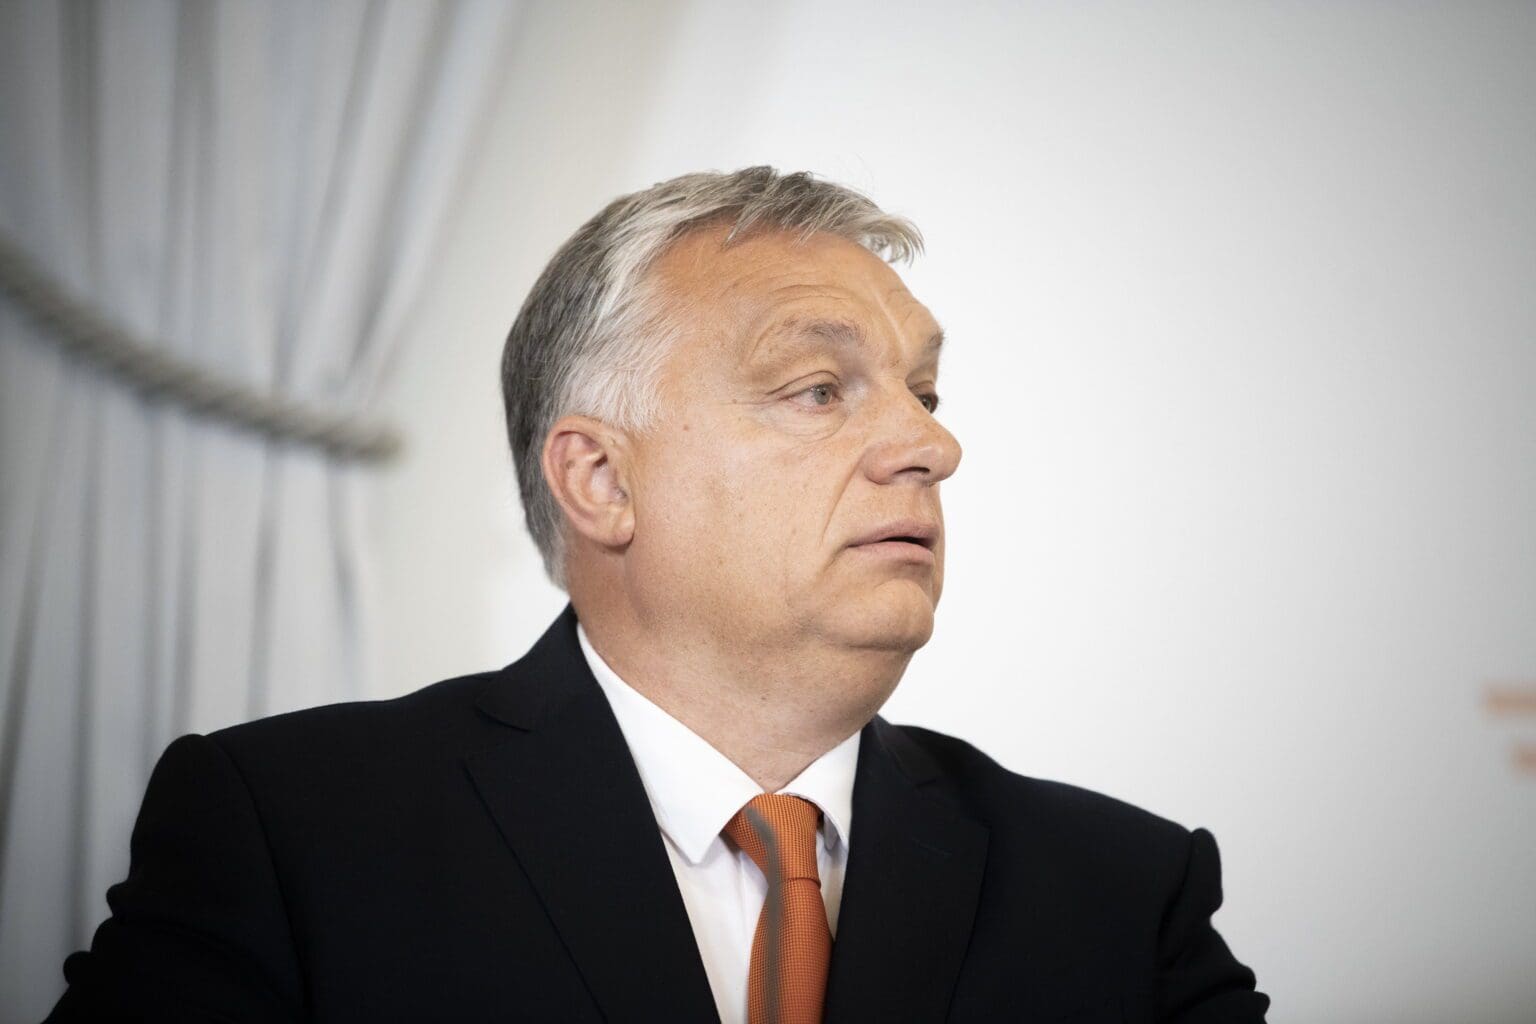 British Commentator in WSJ: Viktor Orbán’s Stance on War Supported Even by Opposition Voters